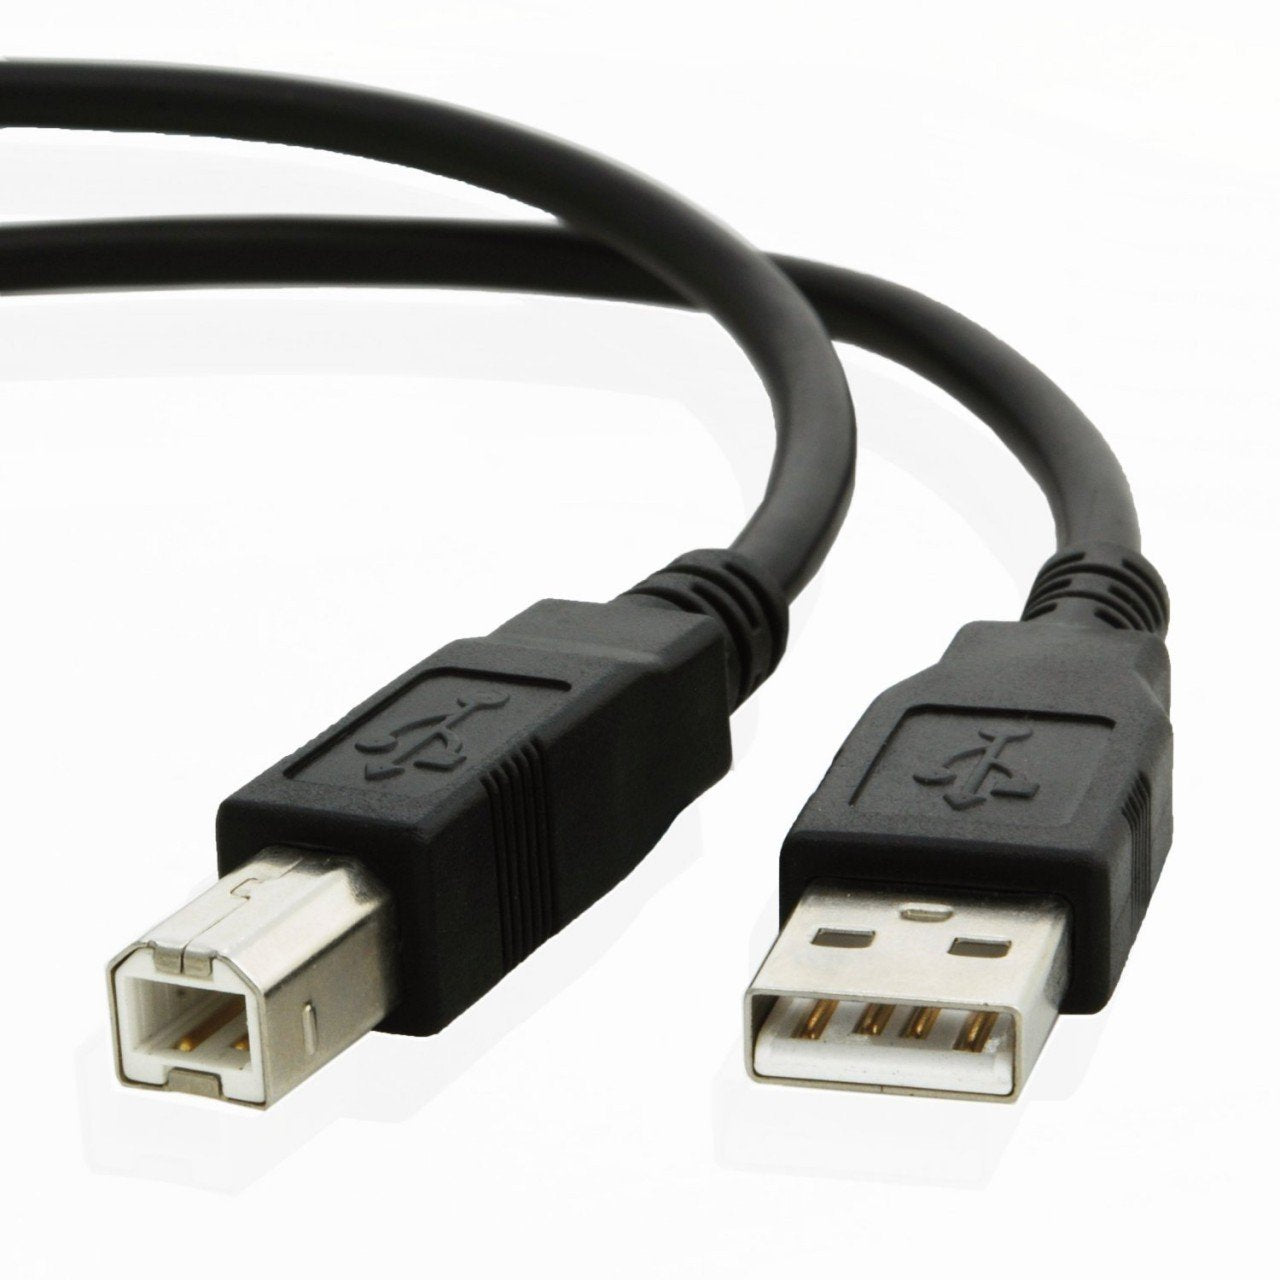 USB cable for Dell S5840cdn